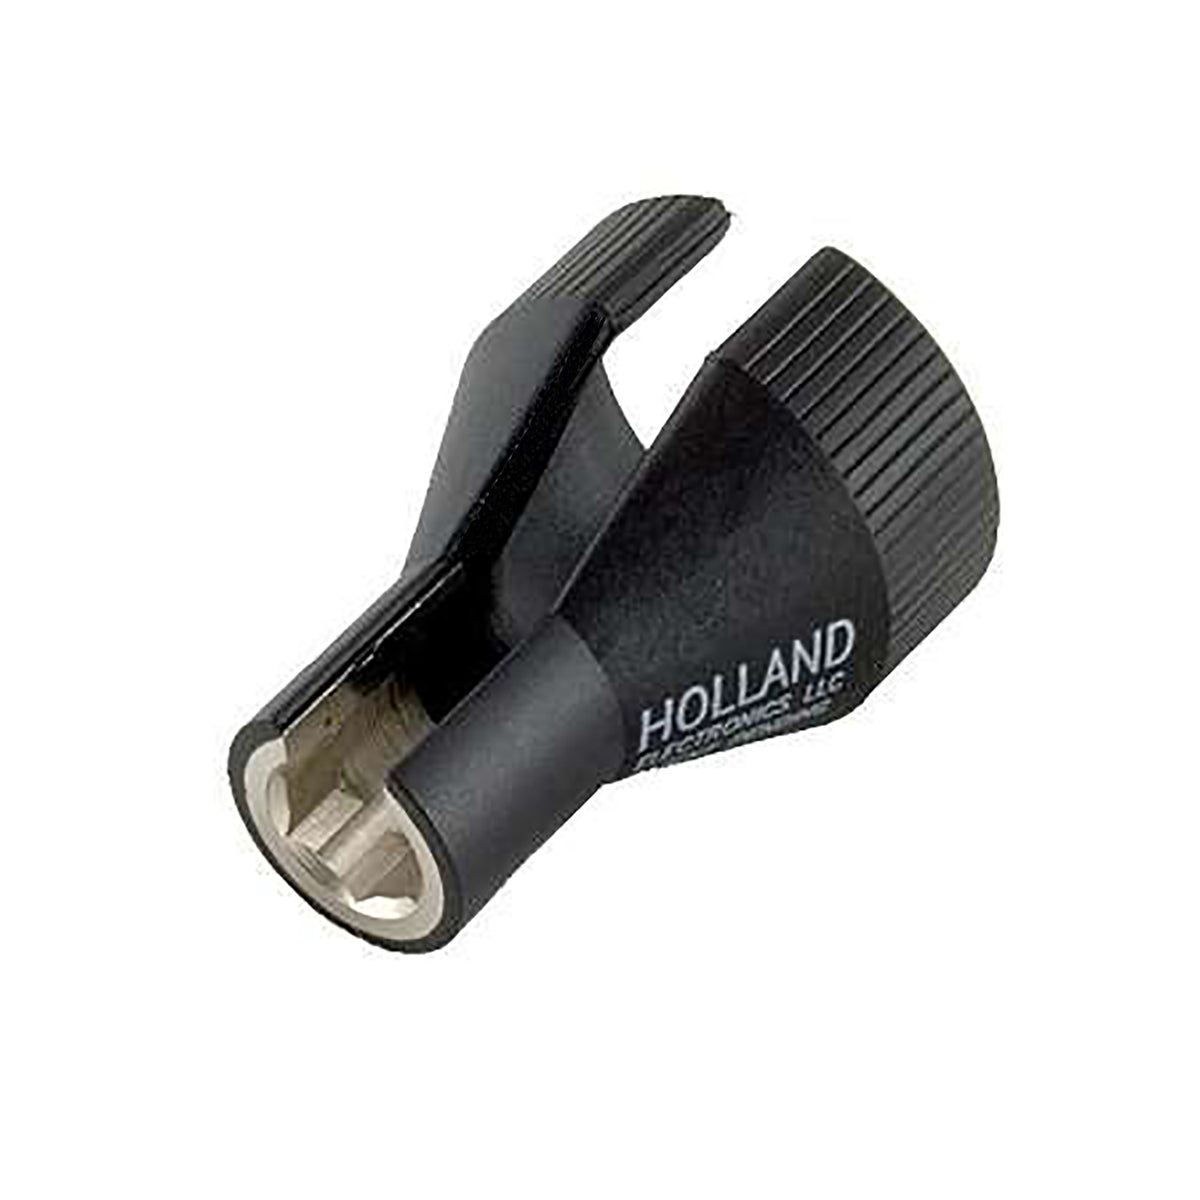 & Installation Holland CIT-1 — F-Connector Tool SatelliteSale Removal